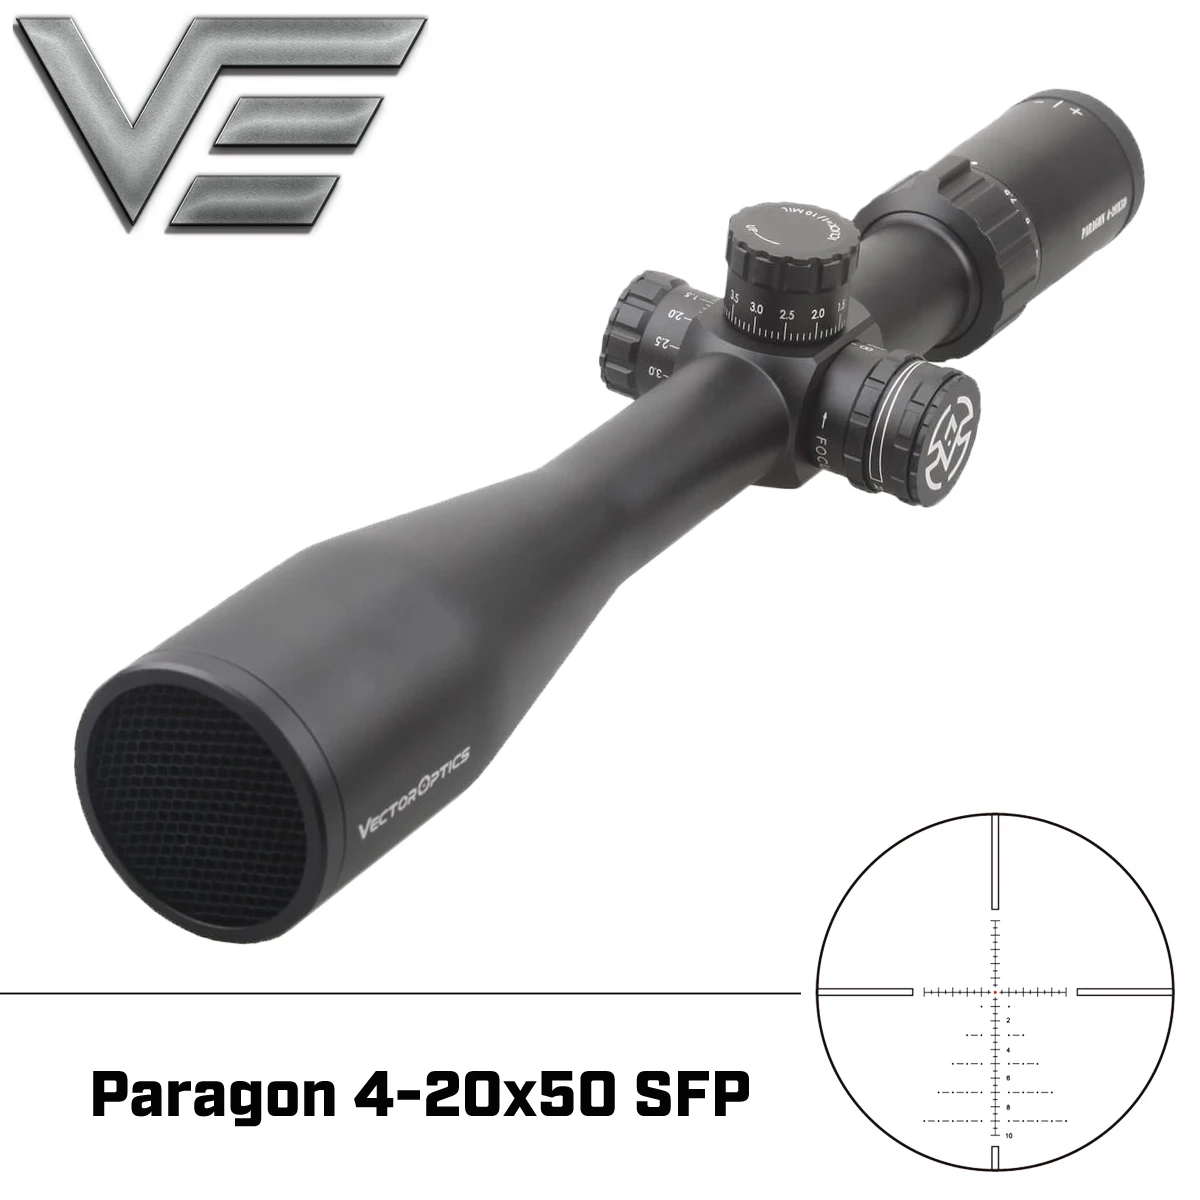 

Vector Optics Paragon 4-20x50 SFP Rifle Scope Tactical Riflescope 1/10 MIL 30mm Monotube W/ Honeycomb Sunshade fit for .223.338